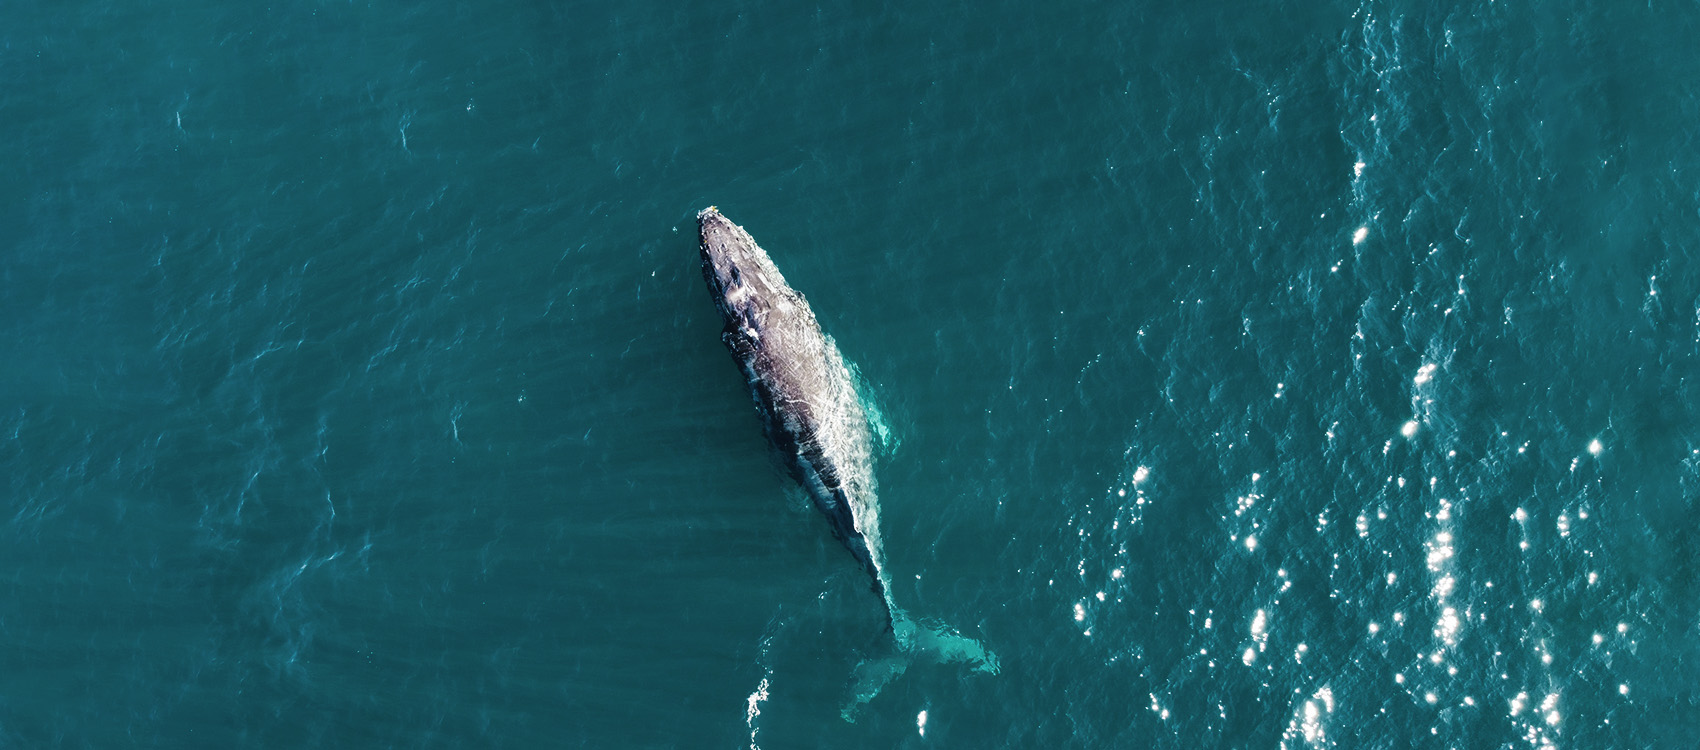 Top drone view of a gray whale